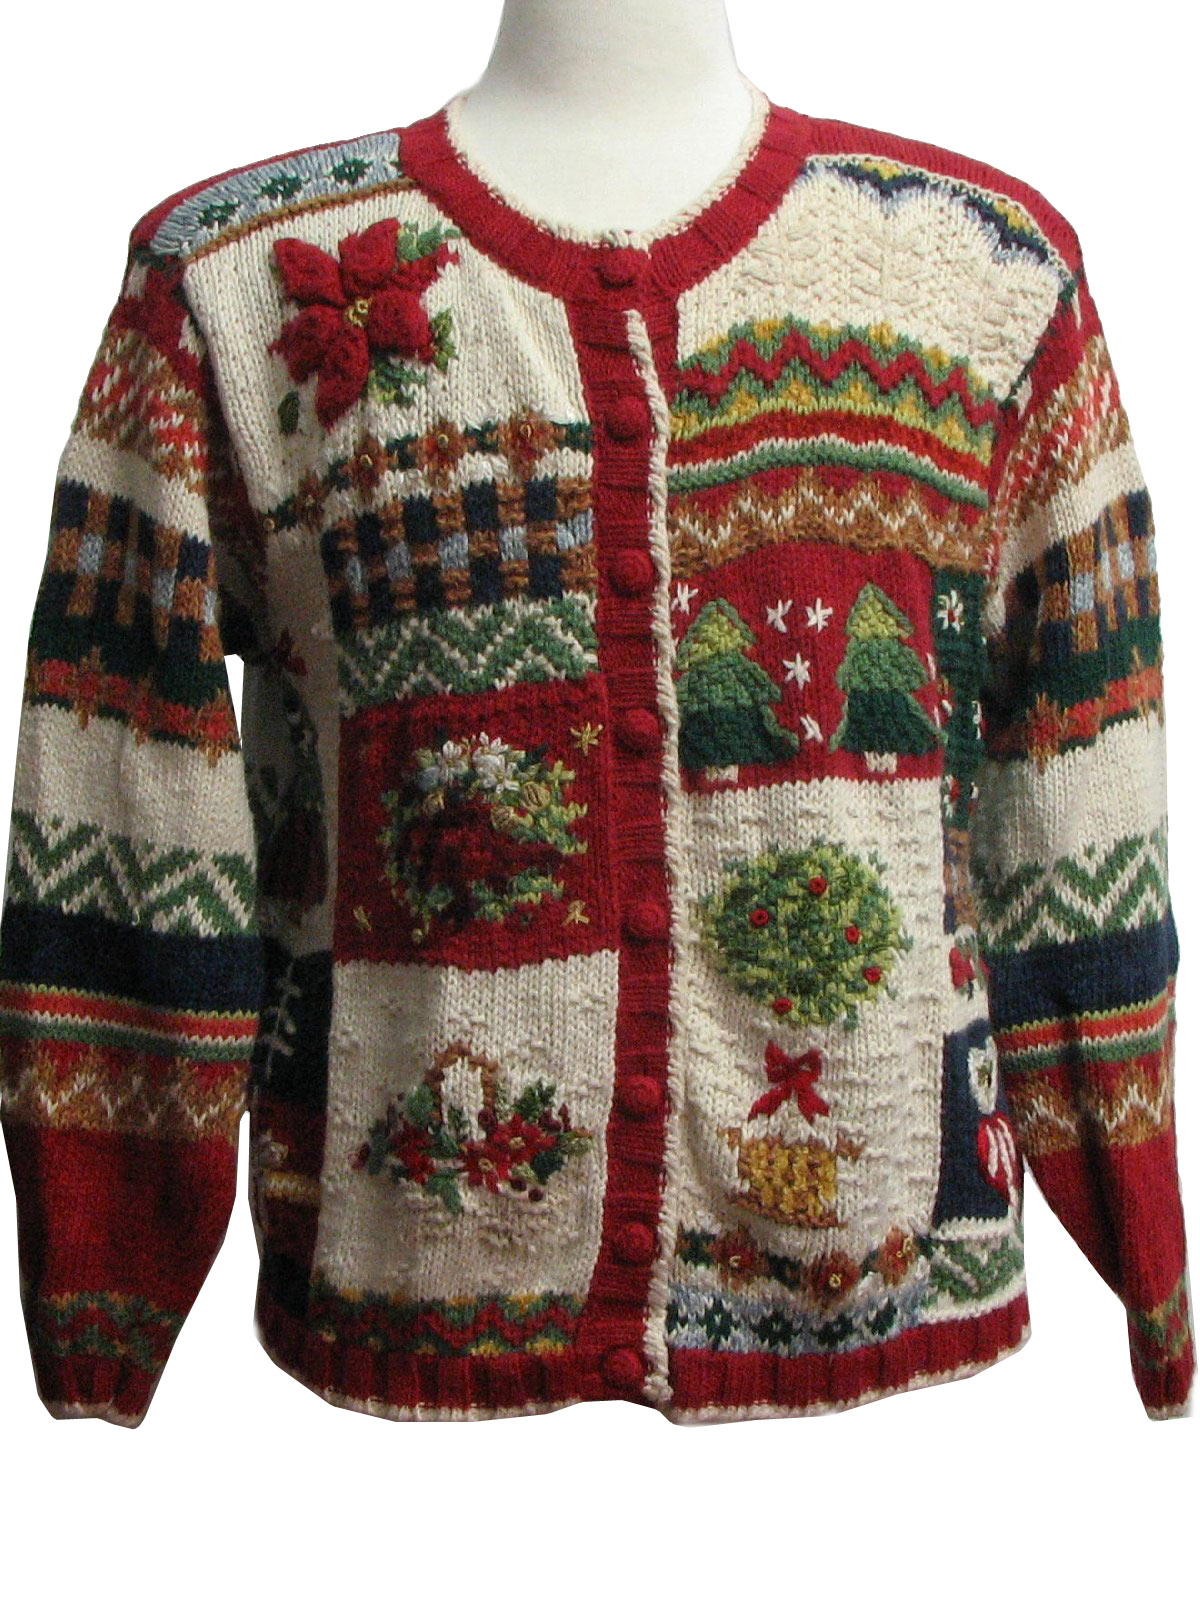 Womens Very Ugly Christmas Sweater: -Heirloom- Womens red, cream ...